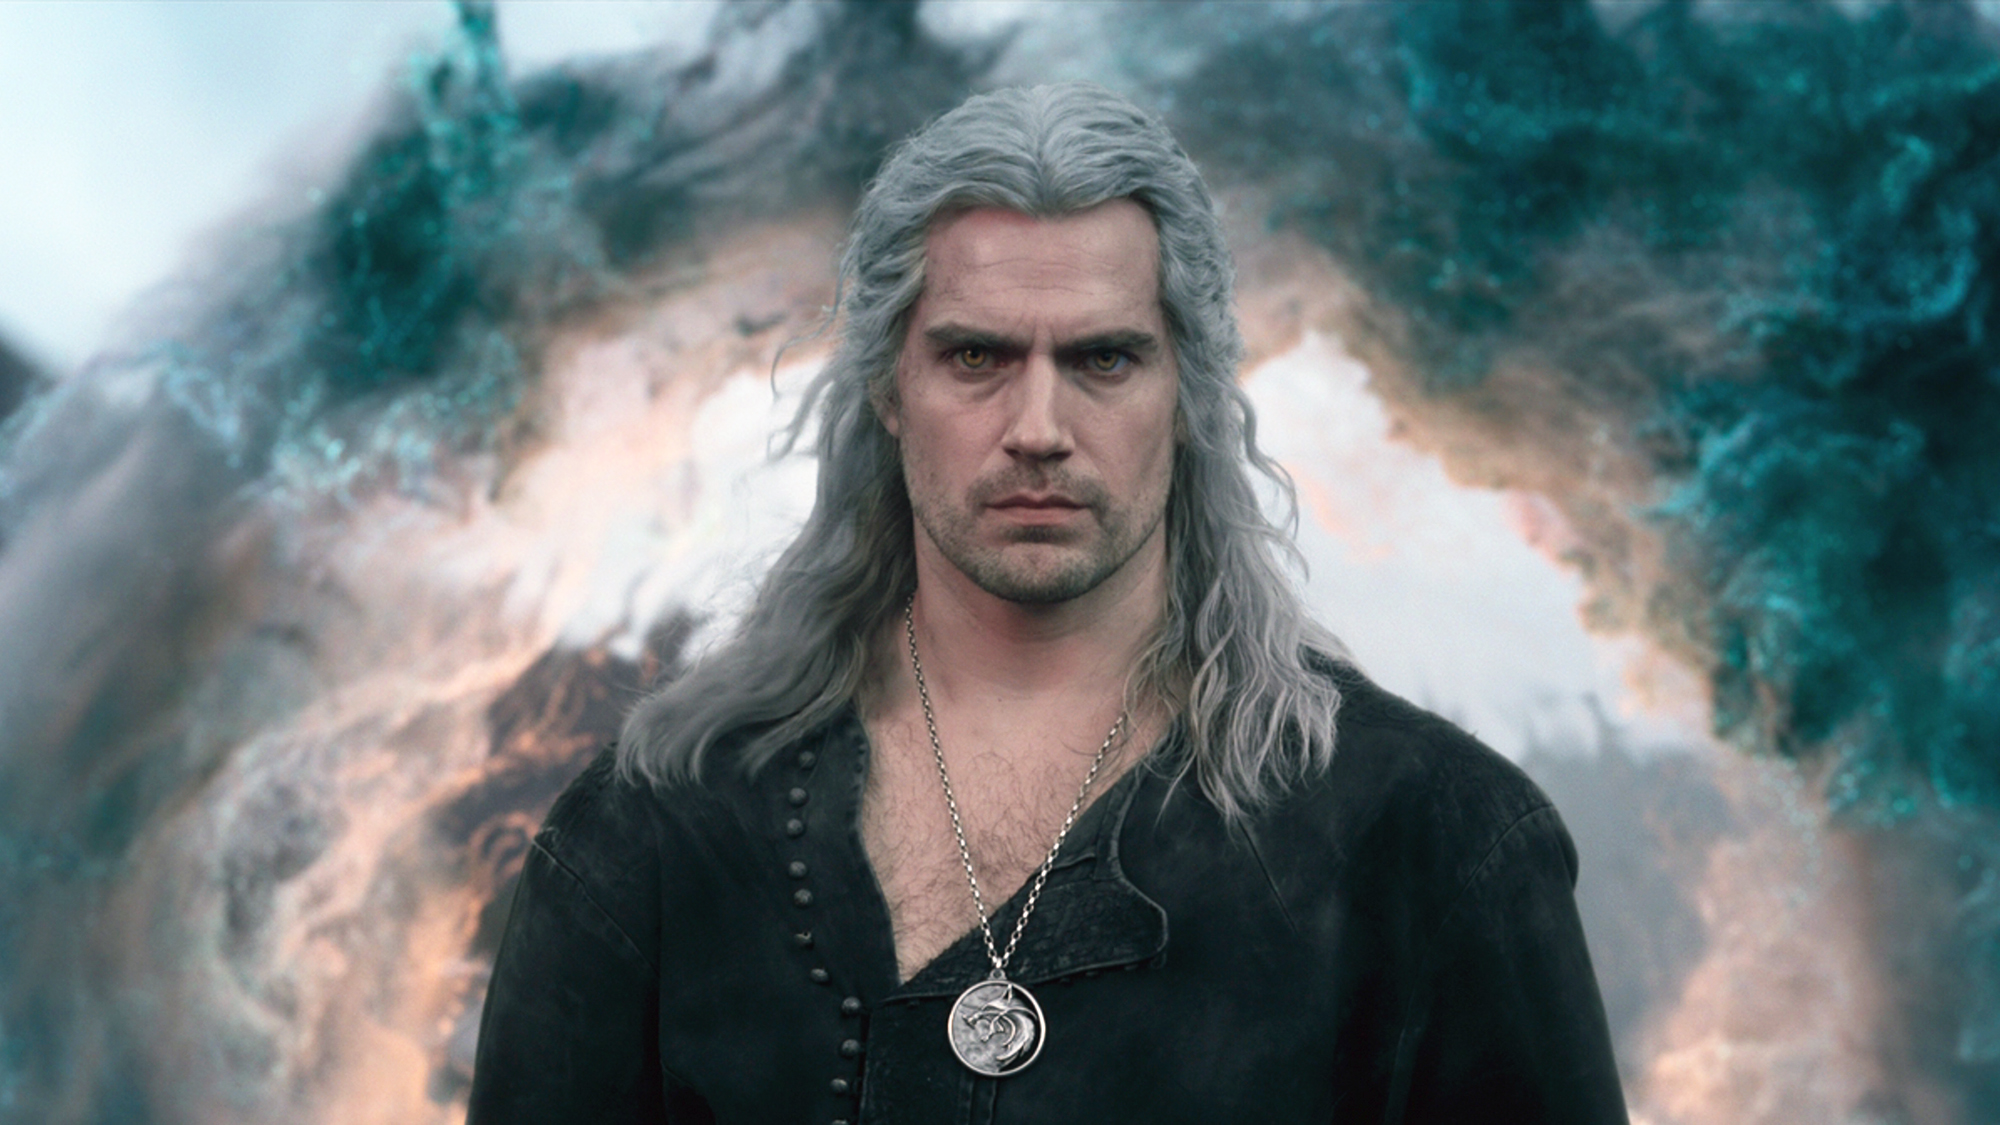 How to watch and stream Making The Witcher: Season 3 - 2023 on Roku